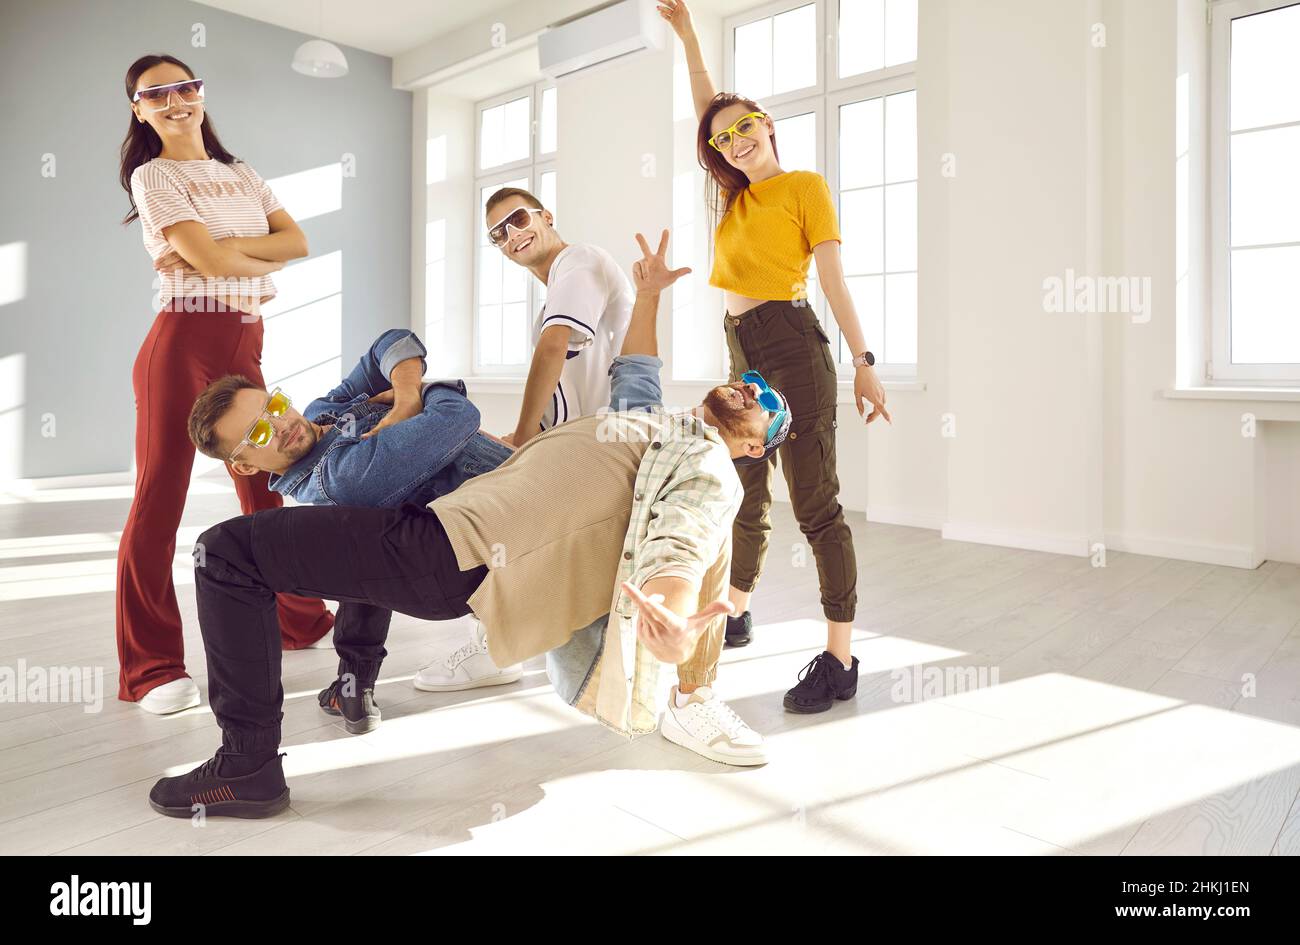 Team of cheerful young dancers have fun while performing hip-hop or break dancing in studio. Stock Photo